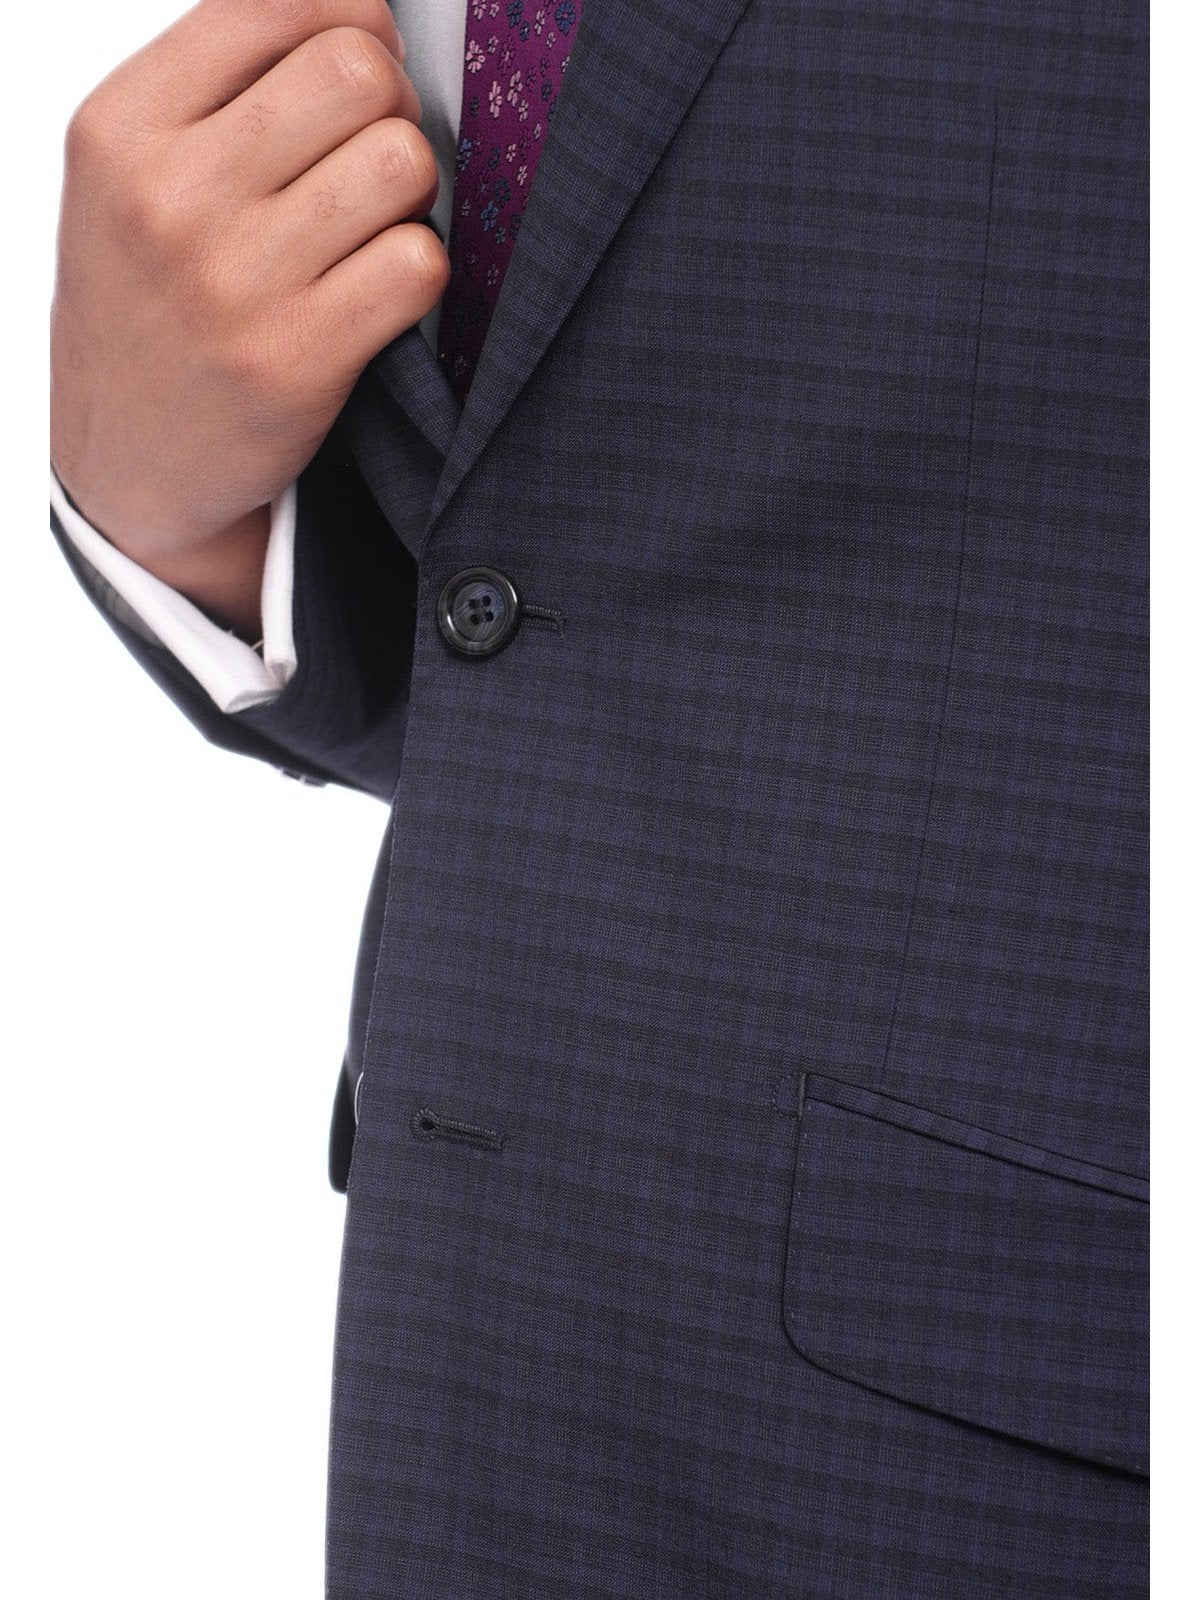 Napoli TWO PIECE SUITS Napoli Slim Fit Blue & Black Check Two Button Half Canvassed Wool Suit